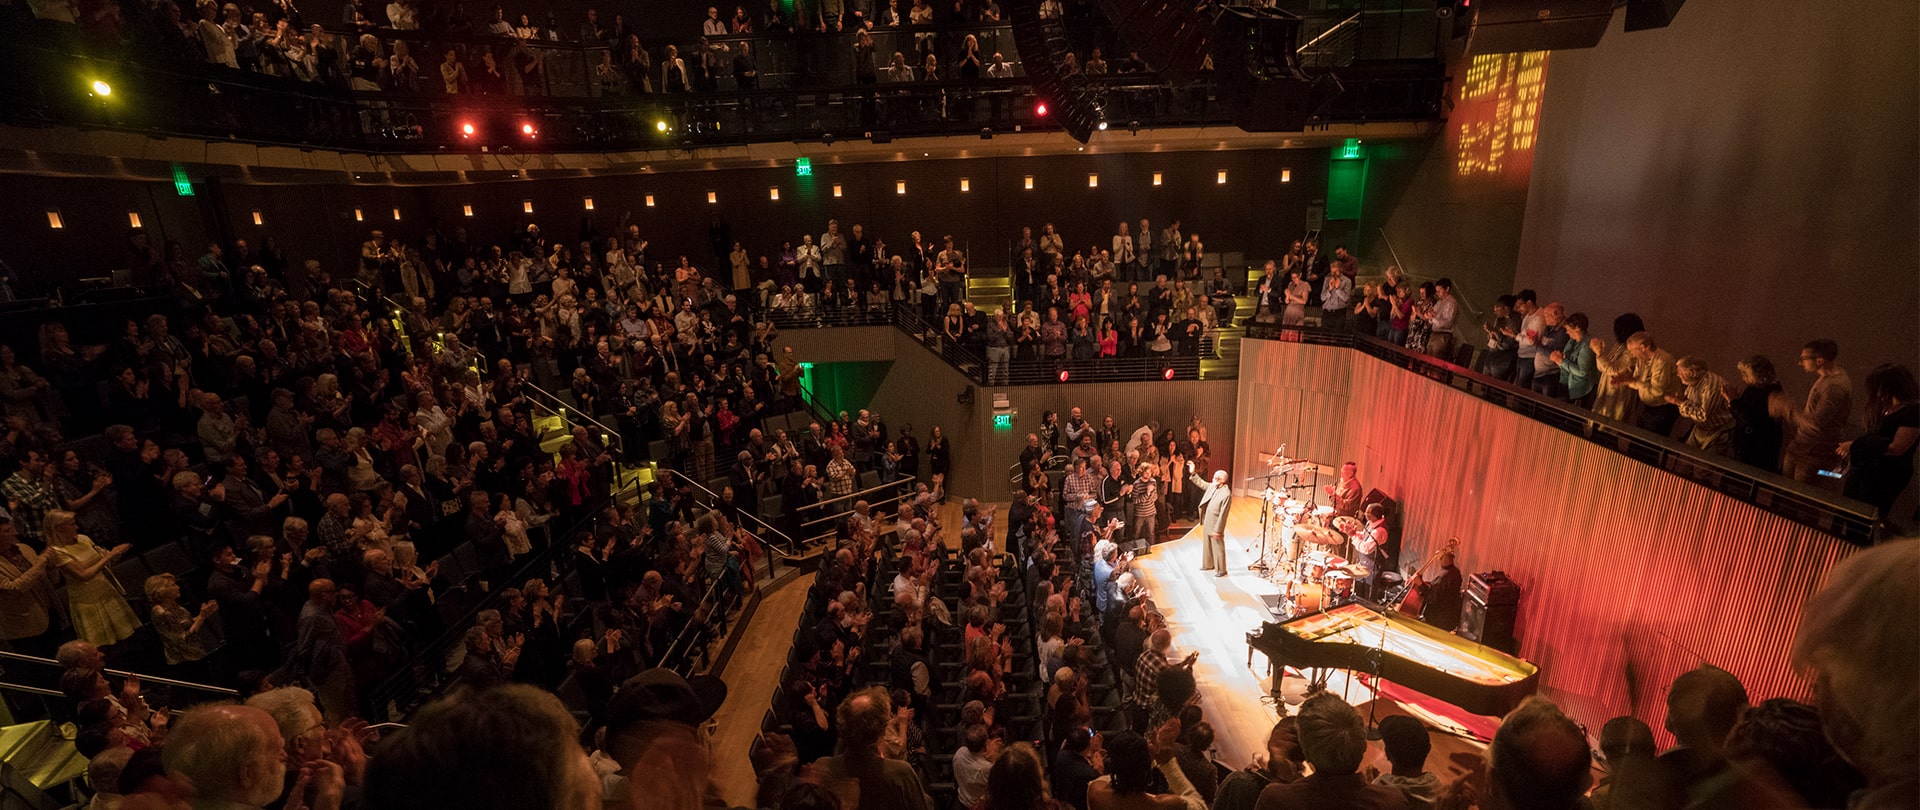 A shot of a bustling Miner Auditorium - we're preparing to reopen the SFJAZZ Center